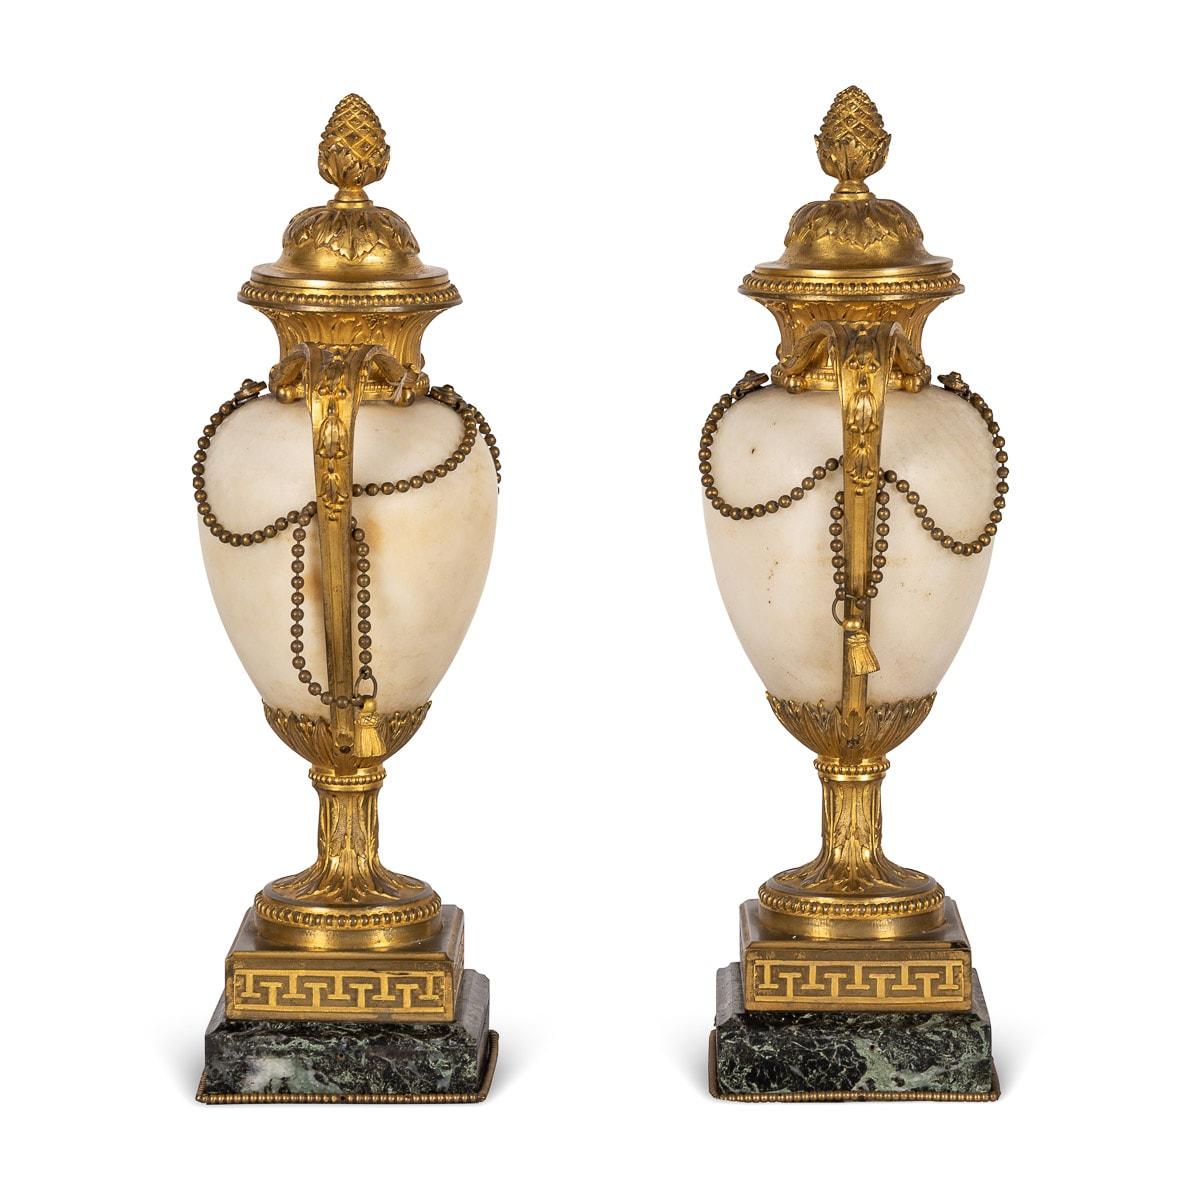 19th Century French Napoleon III Ormolu & White Marble Urns, circa 1850 In Good Condition For Sale In Royal Tunbridge Wells, Kent